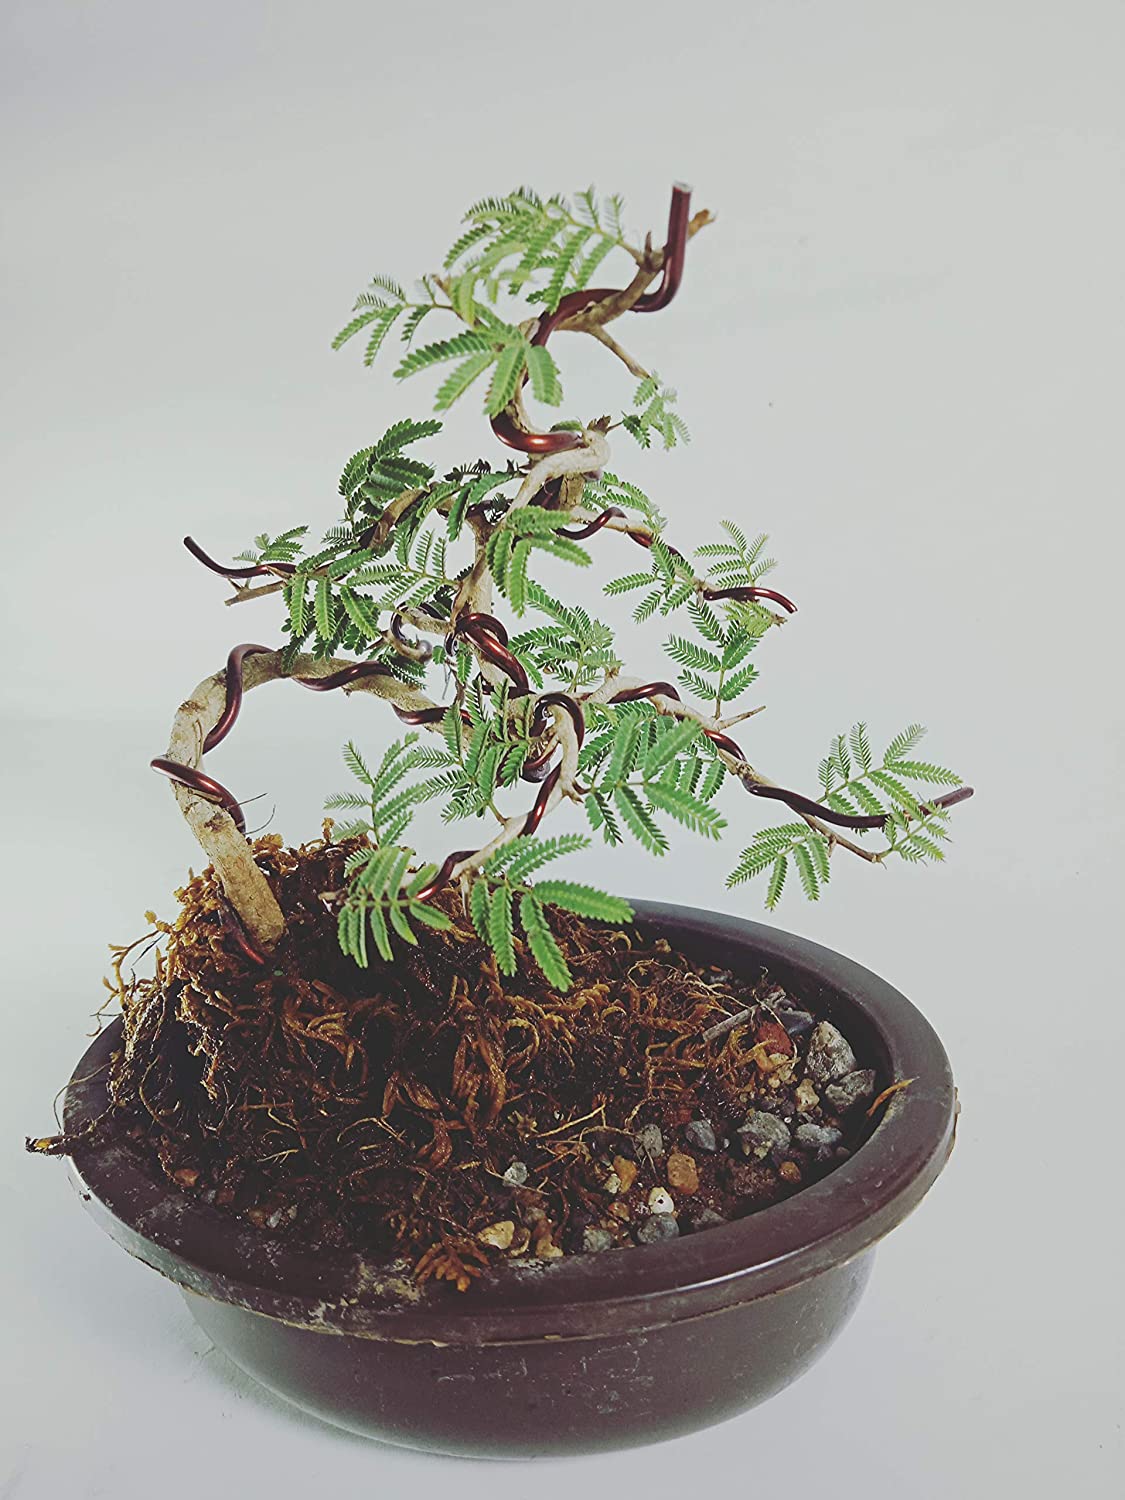 Live Bonsai shami tree Prosopis cineraria 3 years old Live and holy Bonsai shami plant with bonsai pot bring goodluck to your house